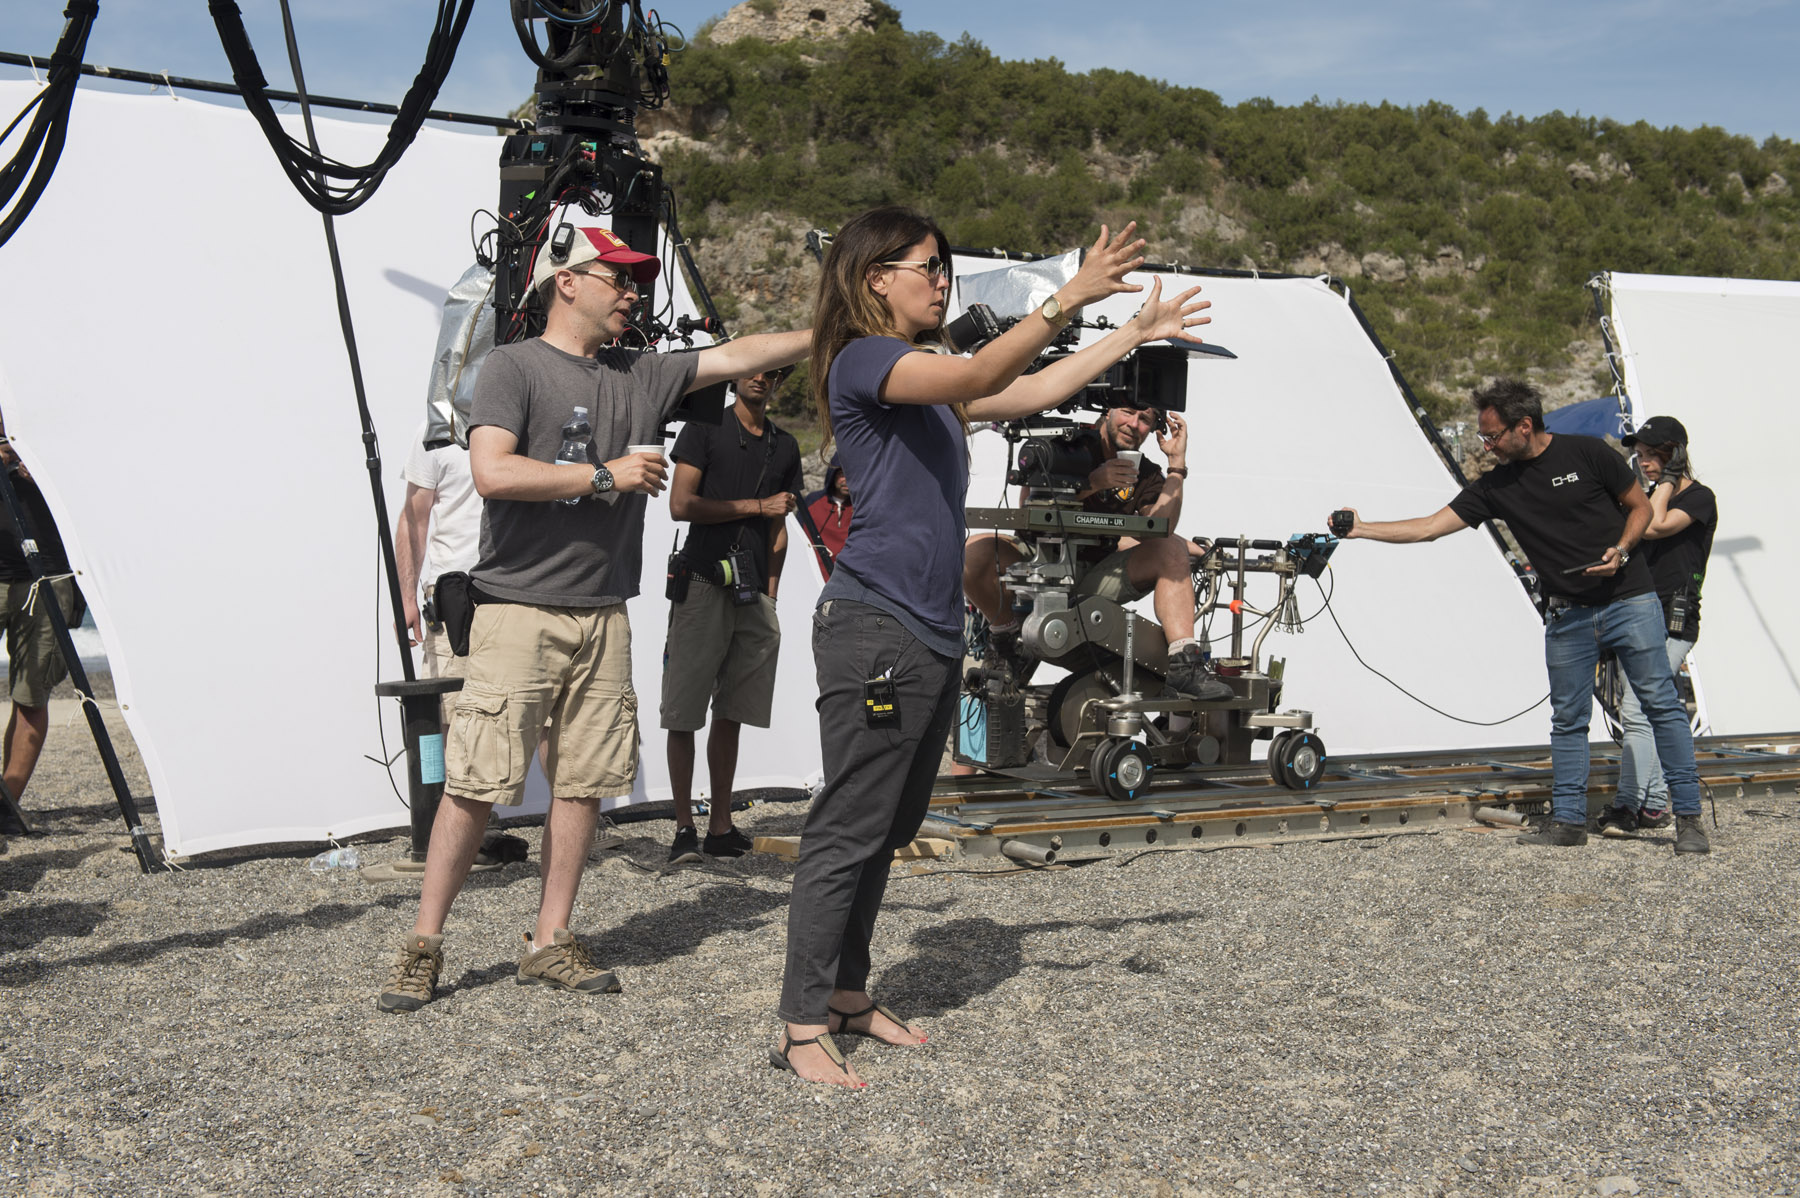 PHOTO: The director of photography for Wonder Woman shares photos from the set. Director Patty Jenkins is seen on set in this photograph. 